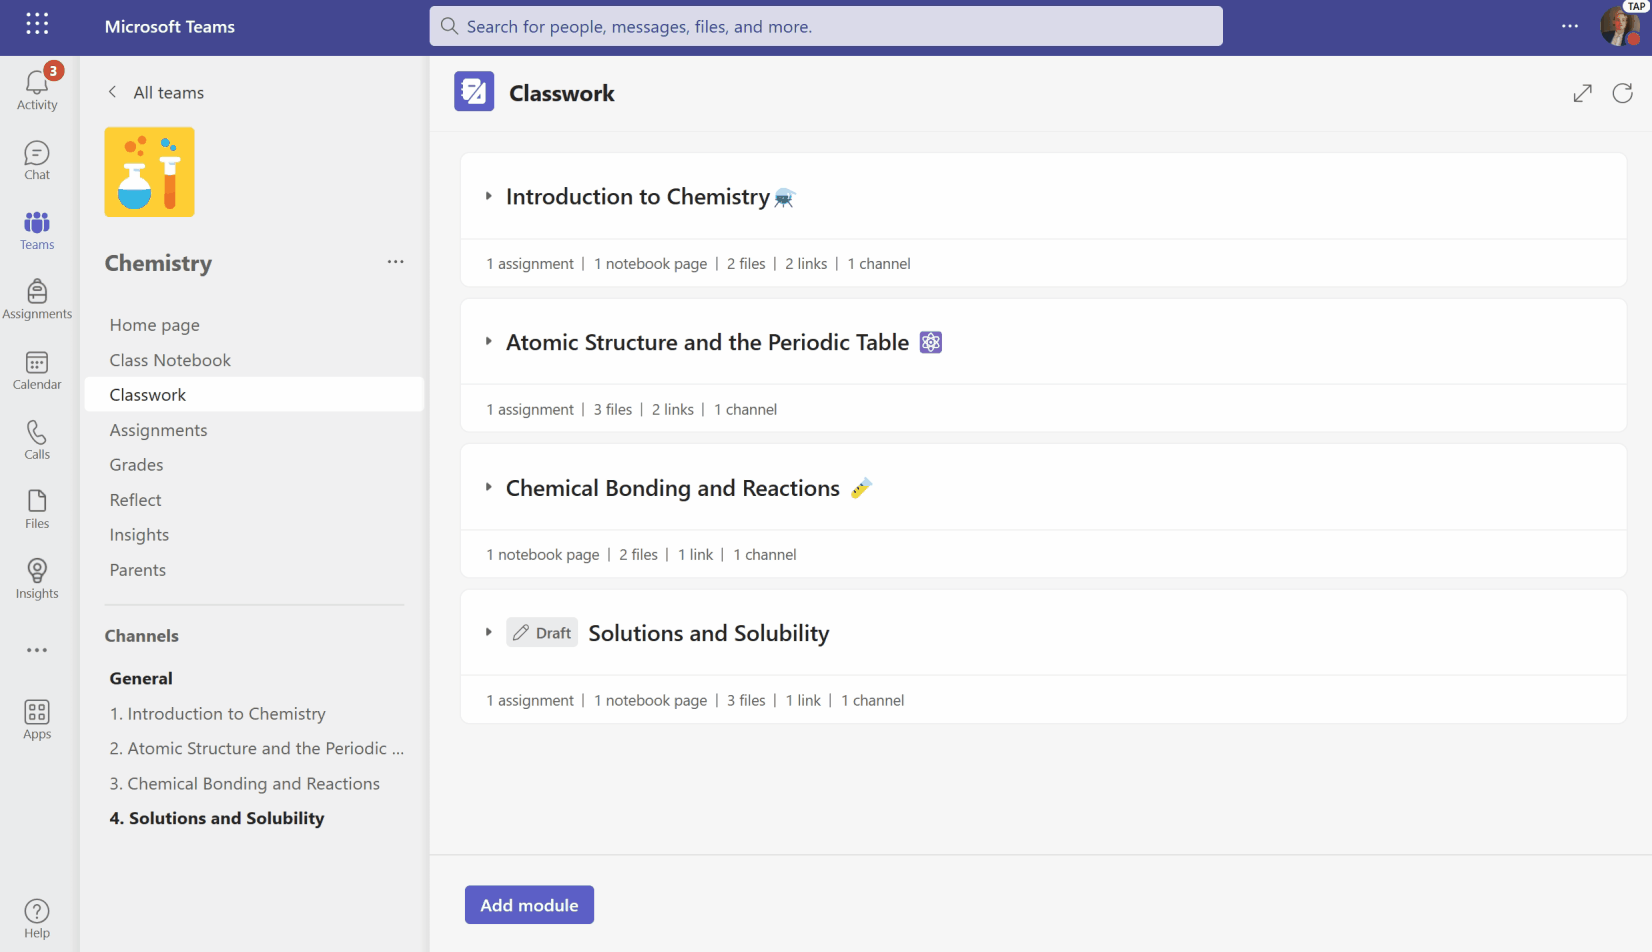 GIF. Using Classwork in Microsoft Teams to organize Chemistry class materials into one view.